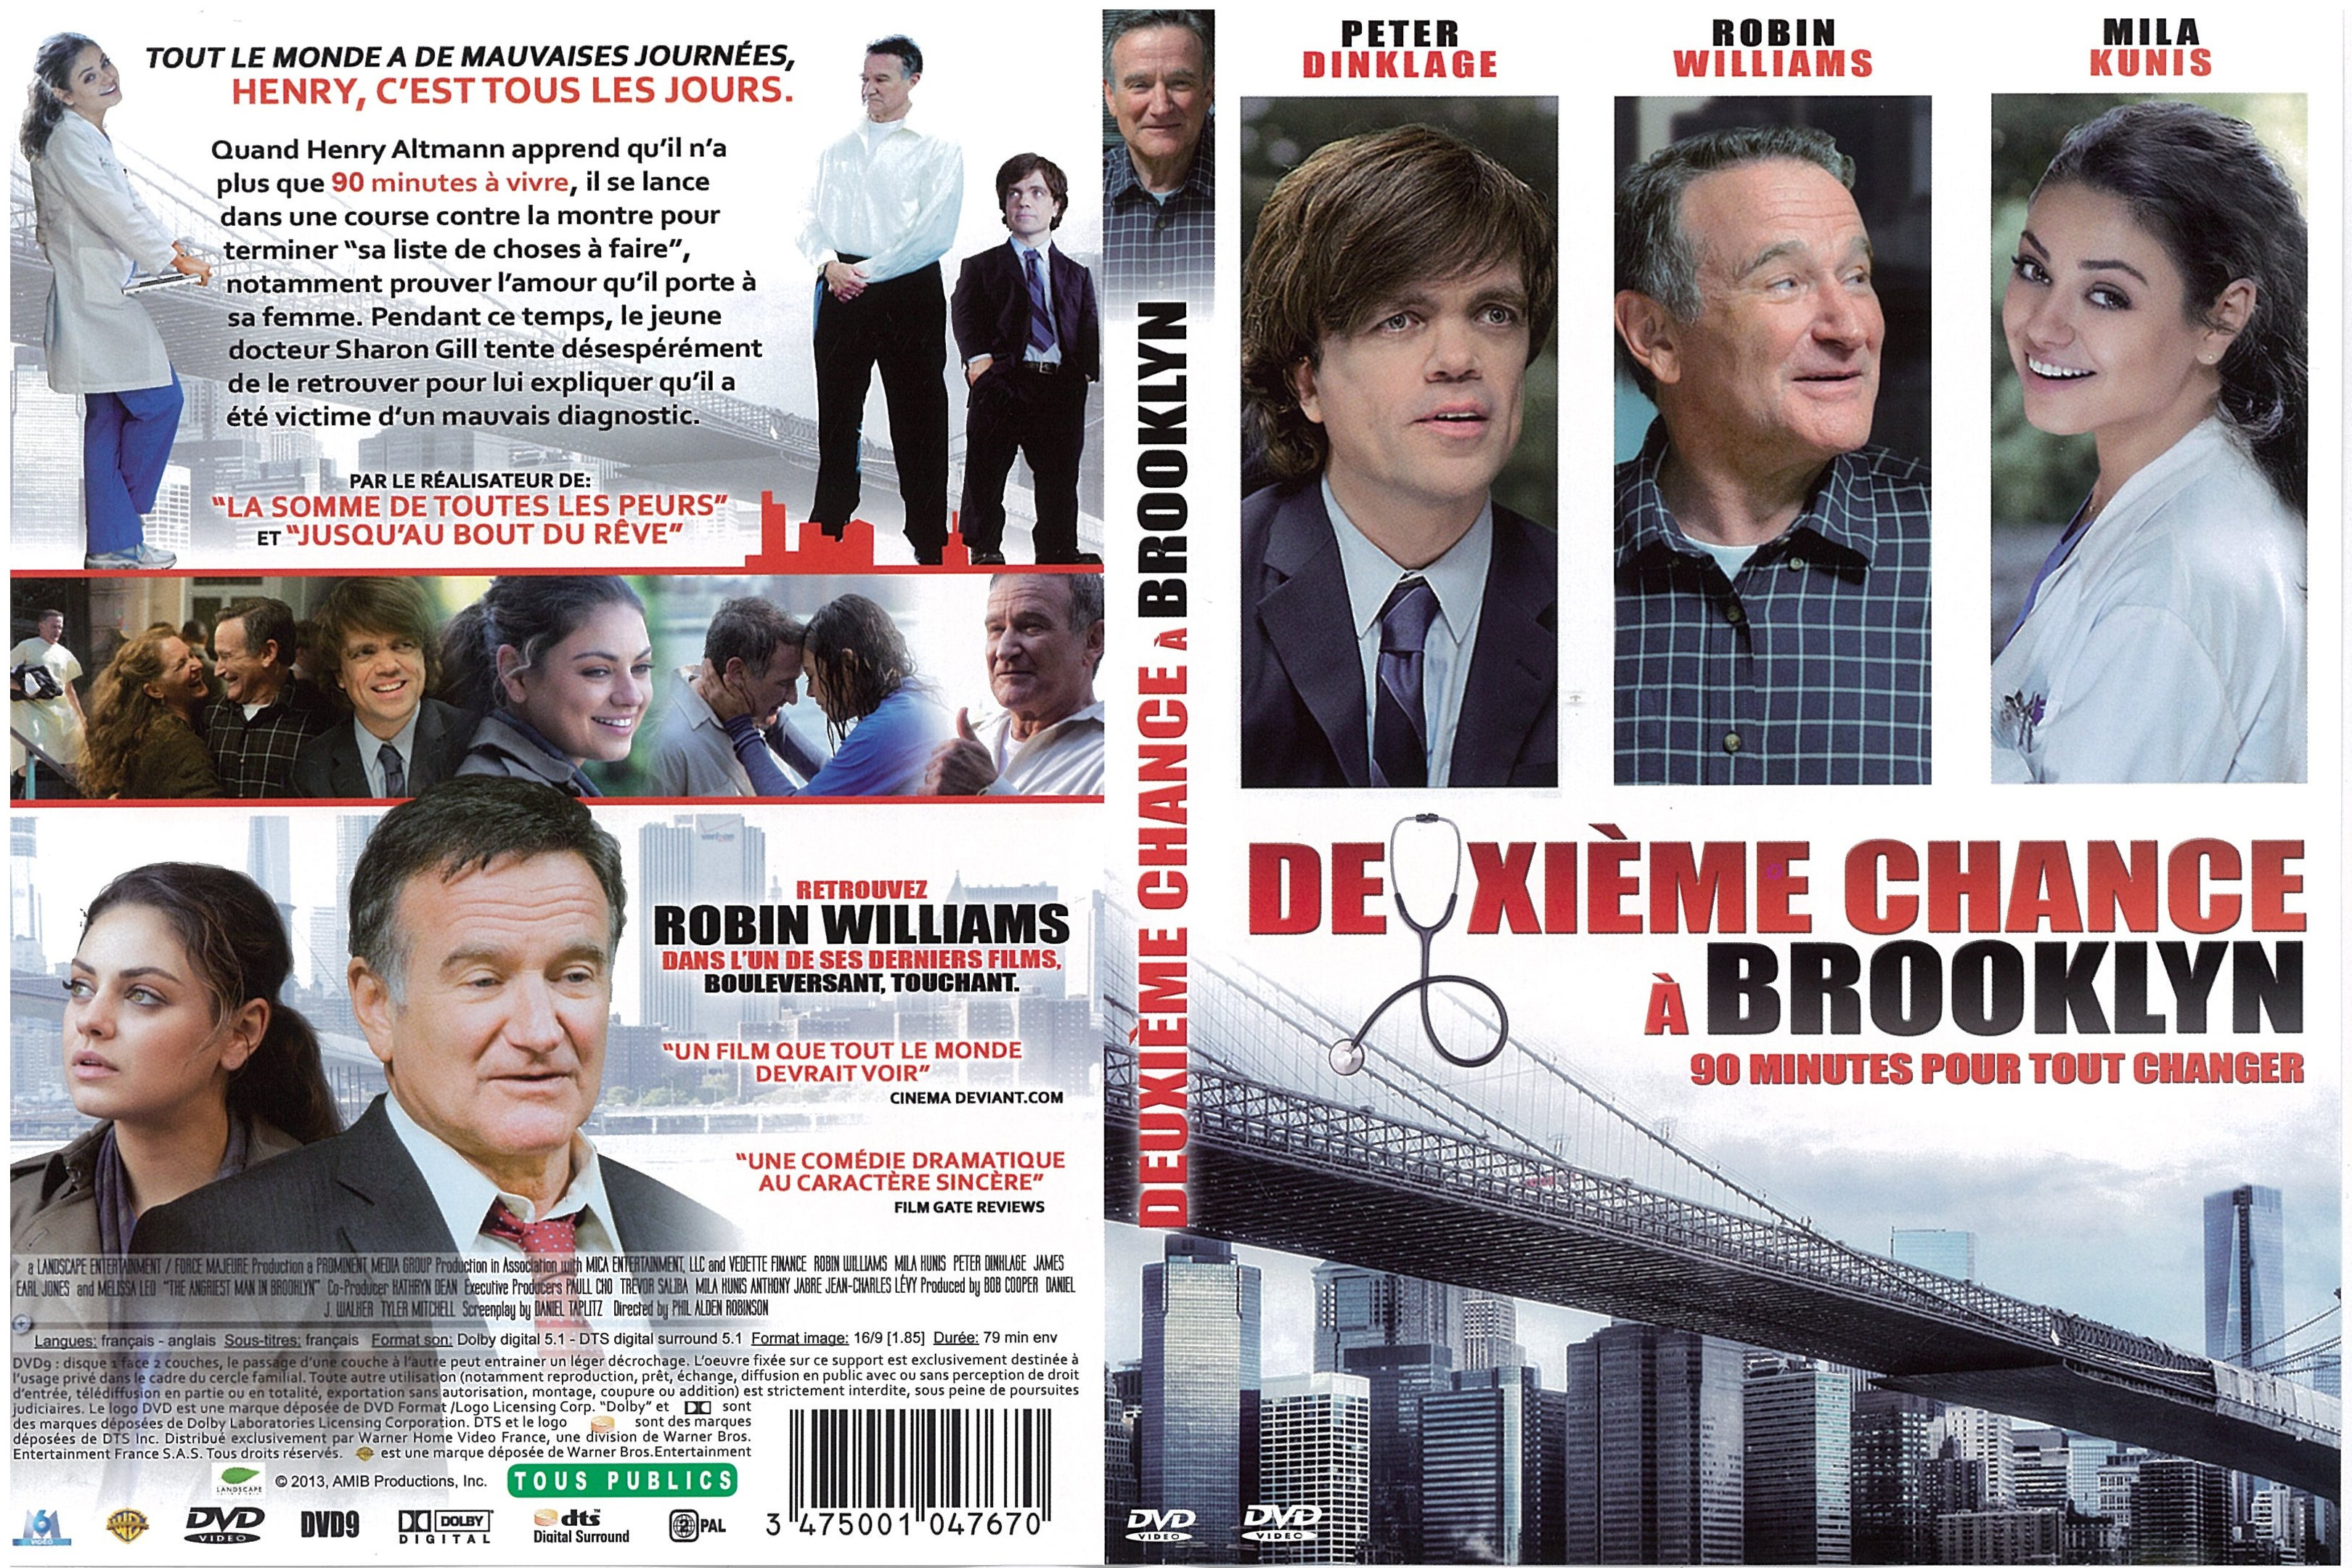 Jaquette DVD Deuxime chance  Brooklyn